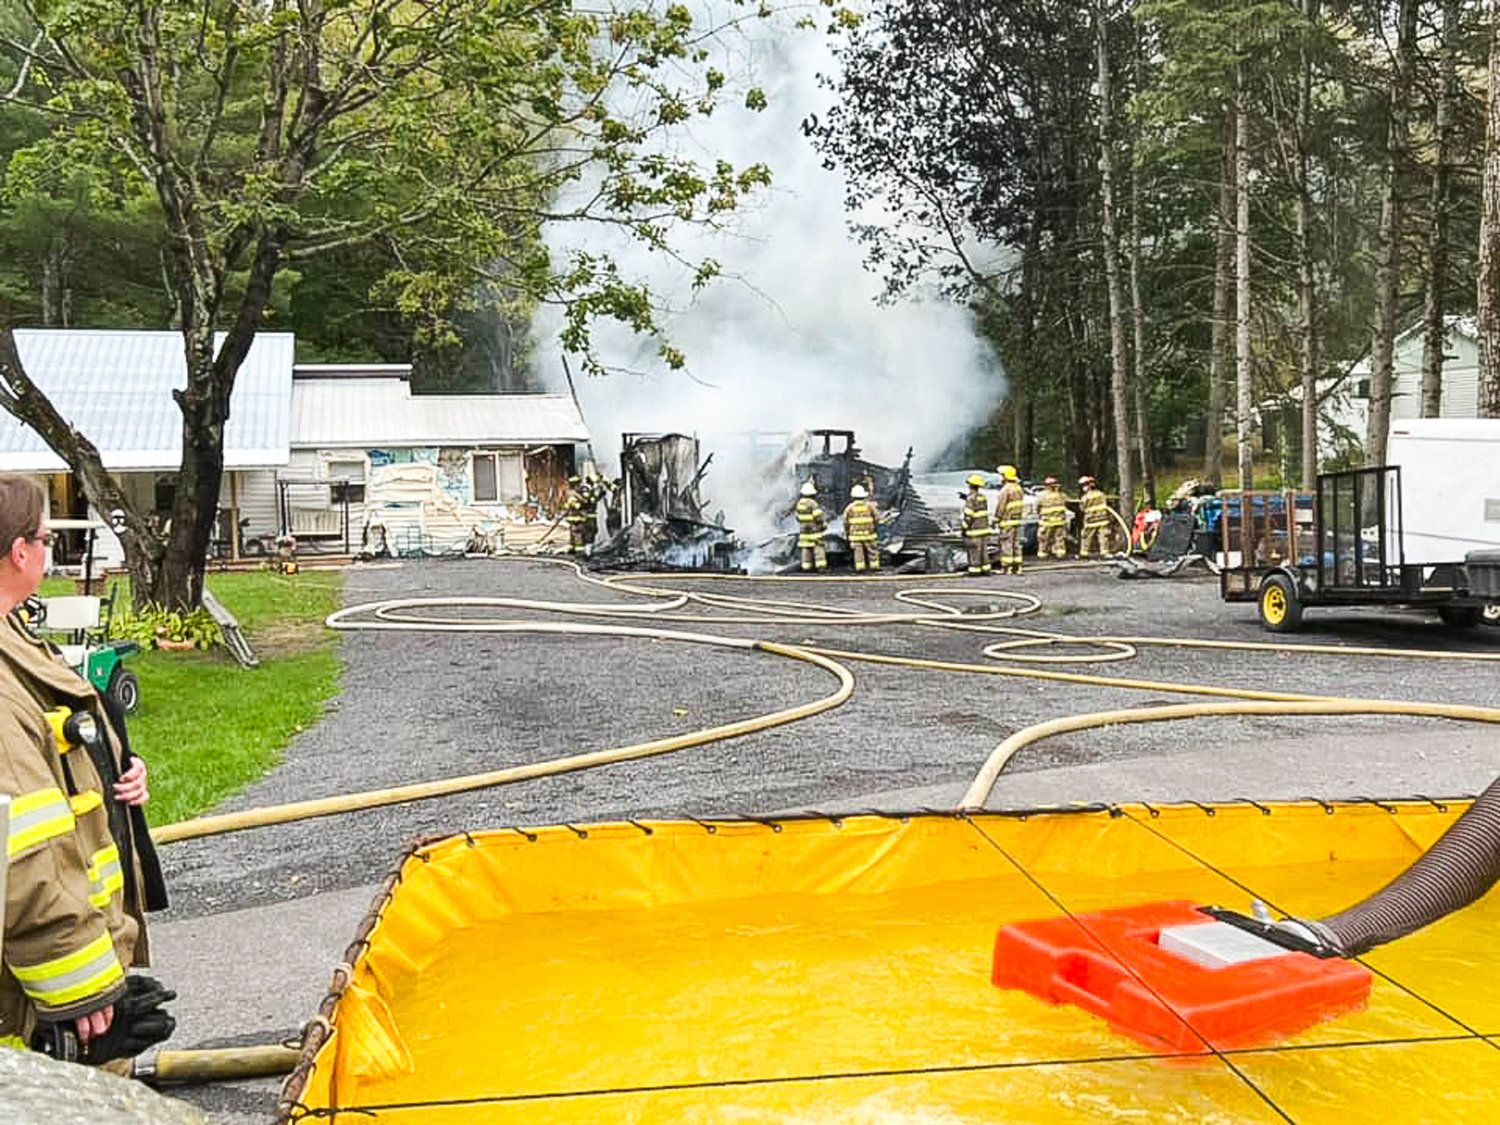 Volunteer firefighters work to douse a garage fire in Remsen Wednesday afternoon. Fire officials said no one was injured and the residence was saved.